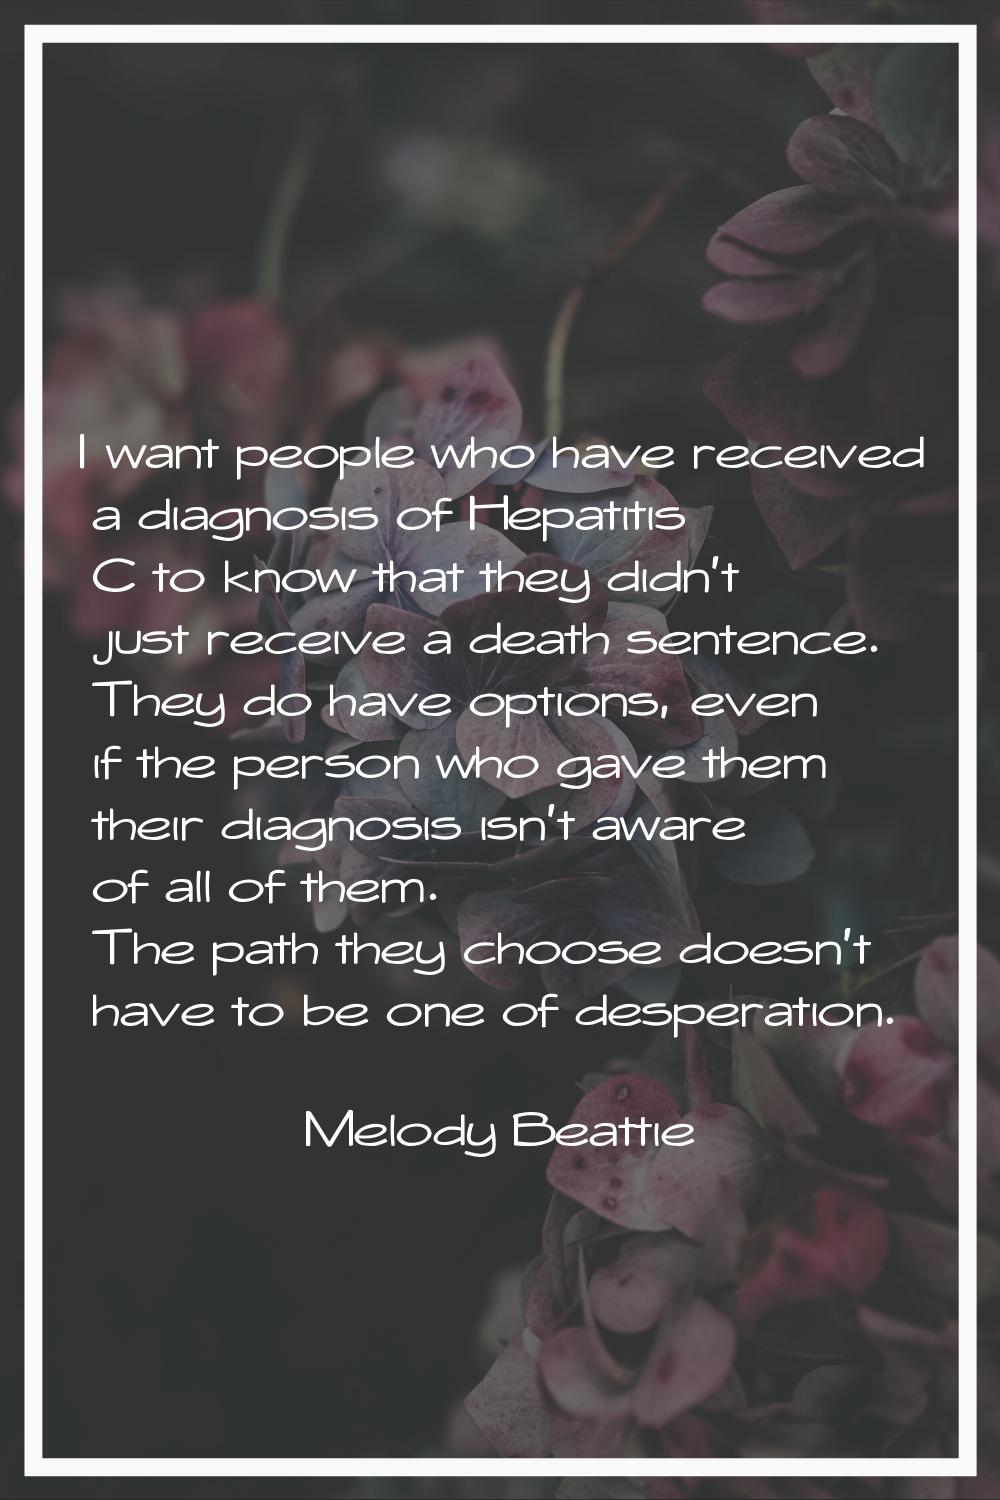 I want people who have received a diagnosis of Hepatitis C to know that they didn't just receive a 